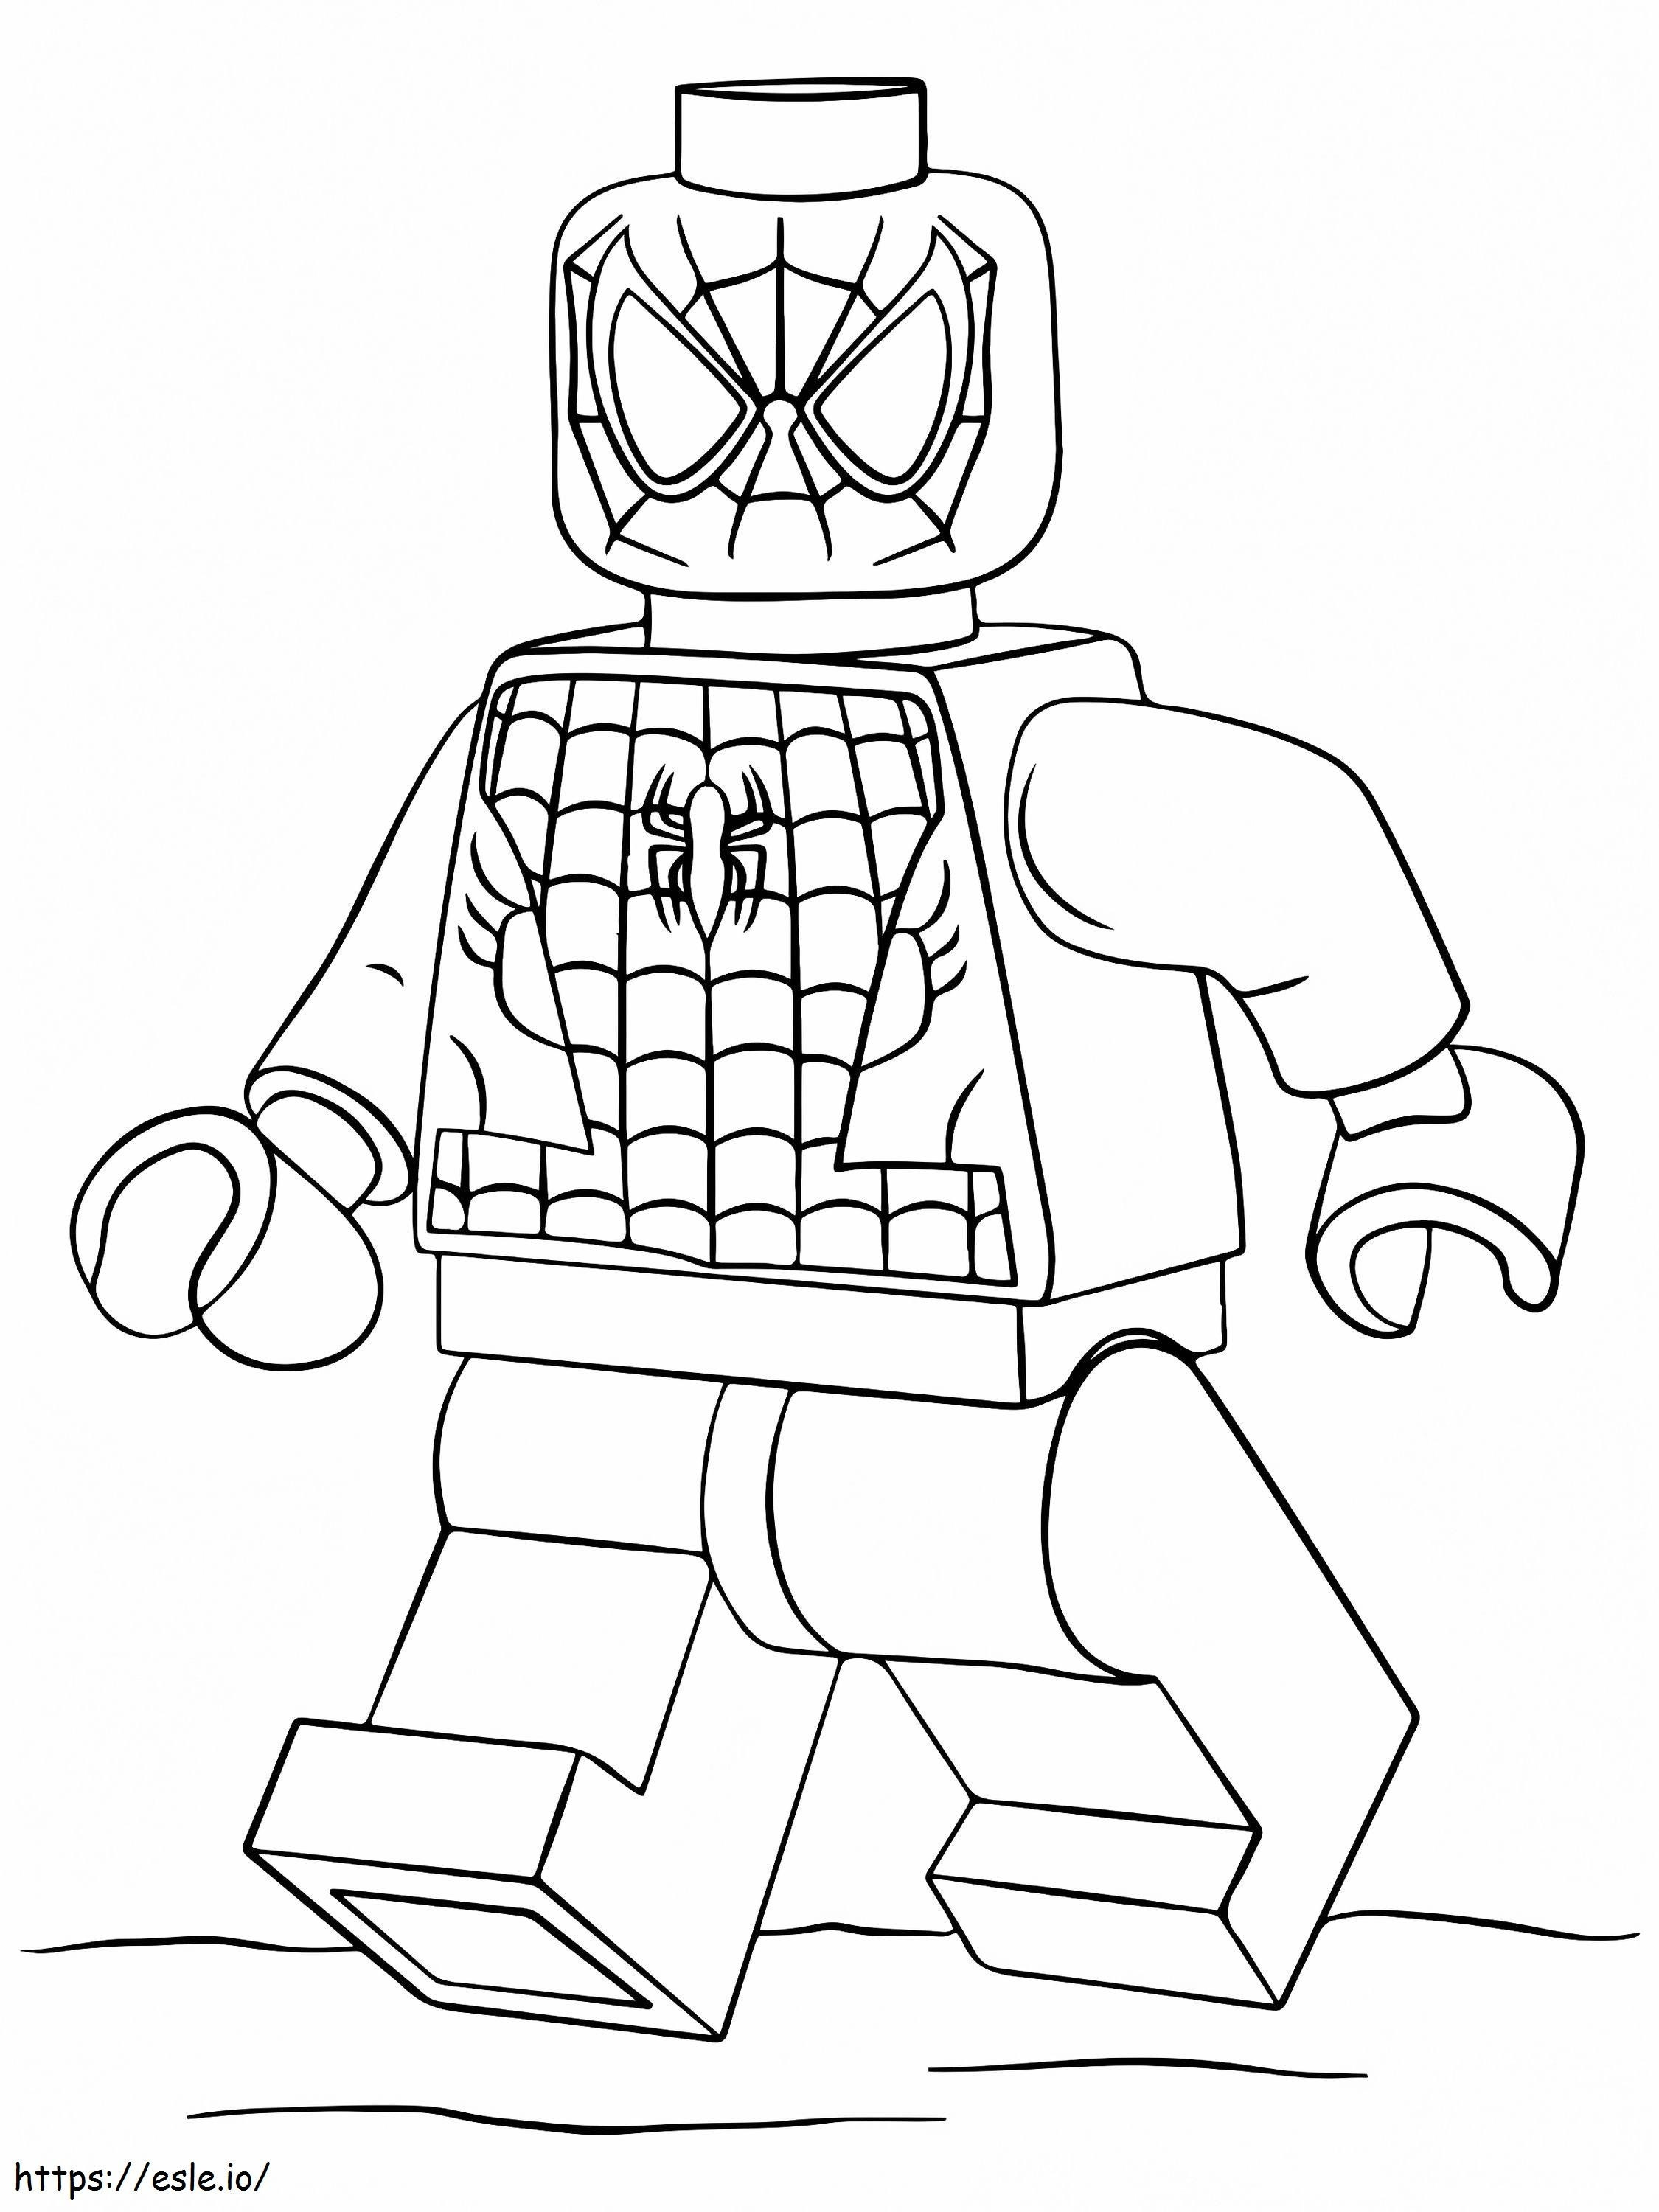 Spiderman Lego Avengers coloring page